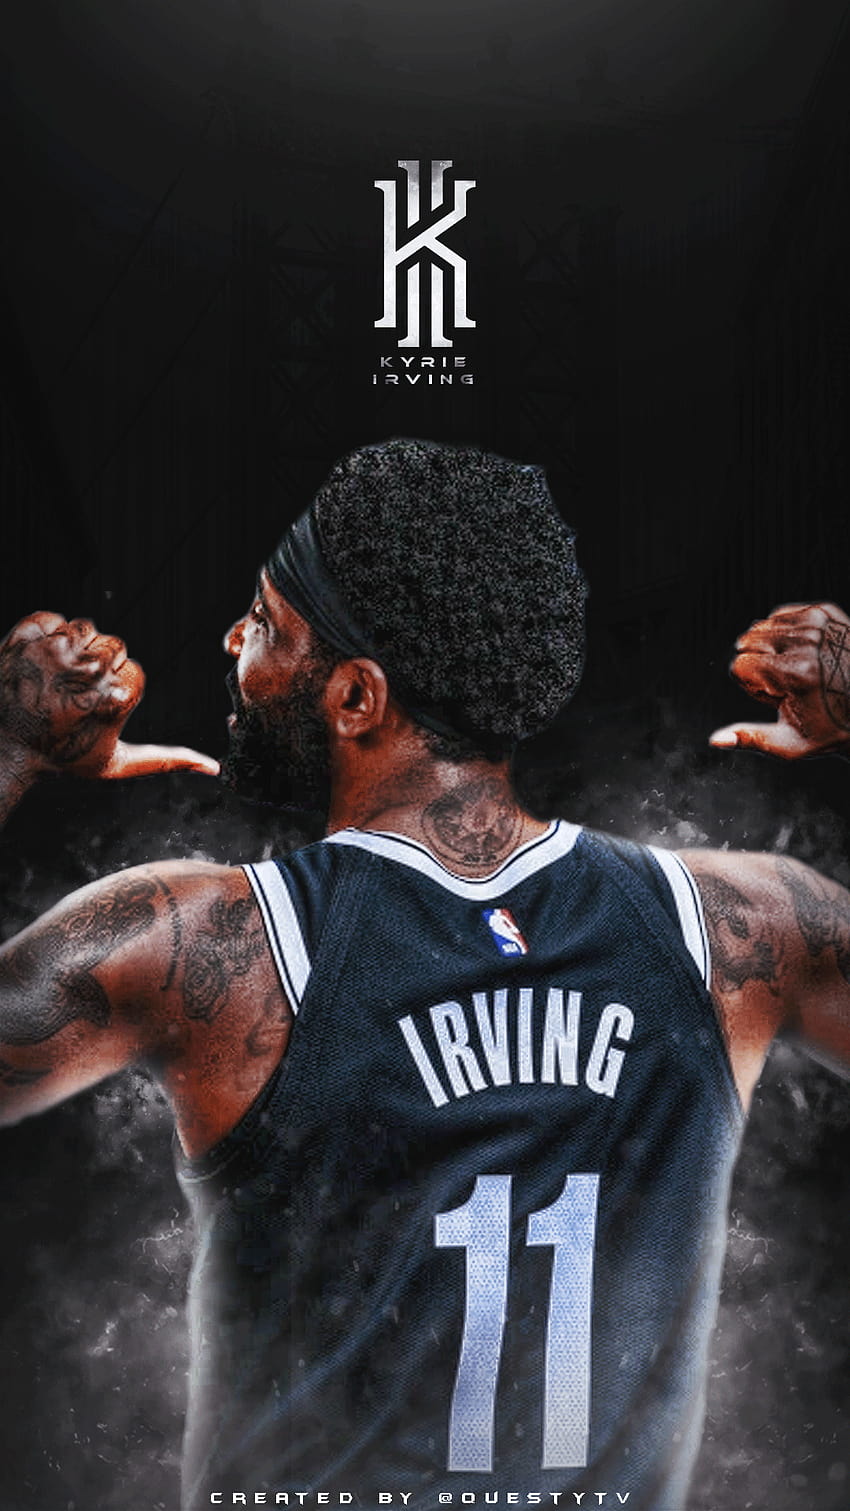 Backgraund Kyrie Irving, kyrie irving 2021 wallpaper ponsel HD